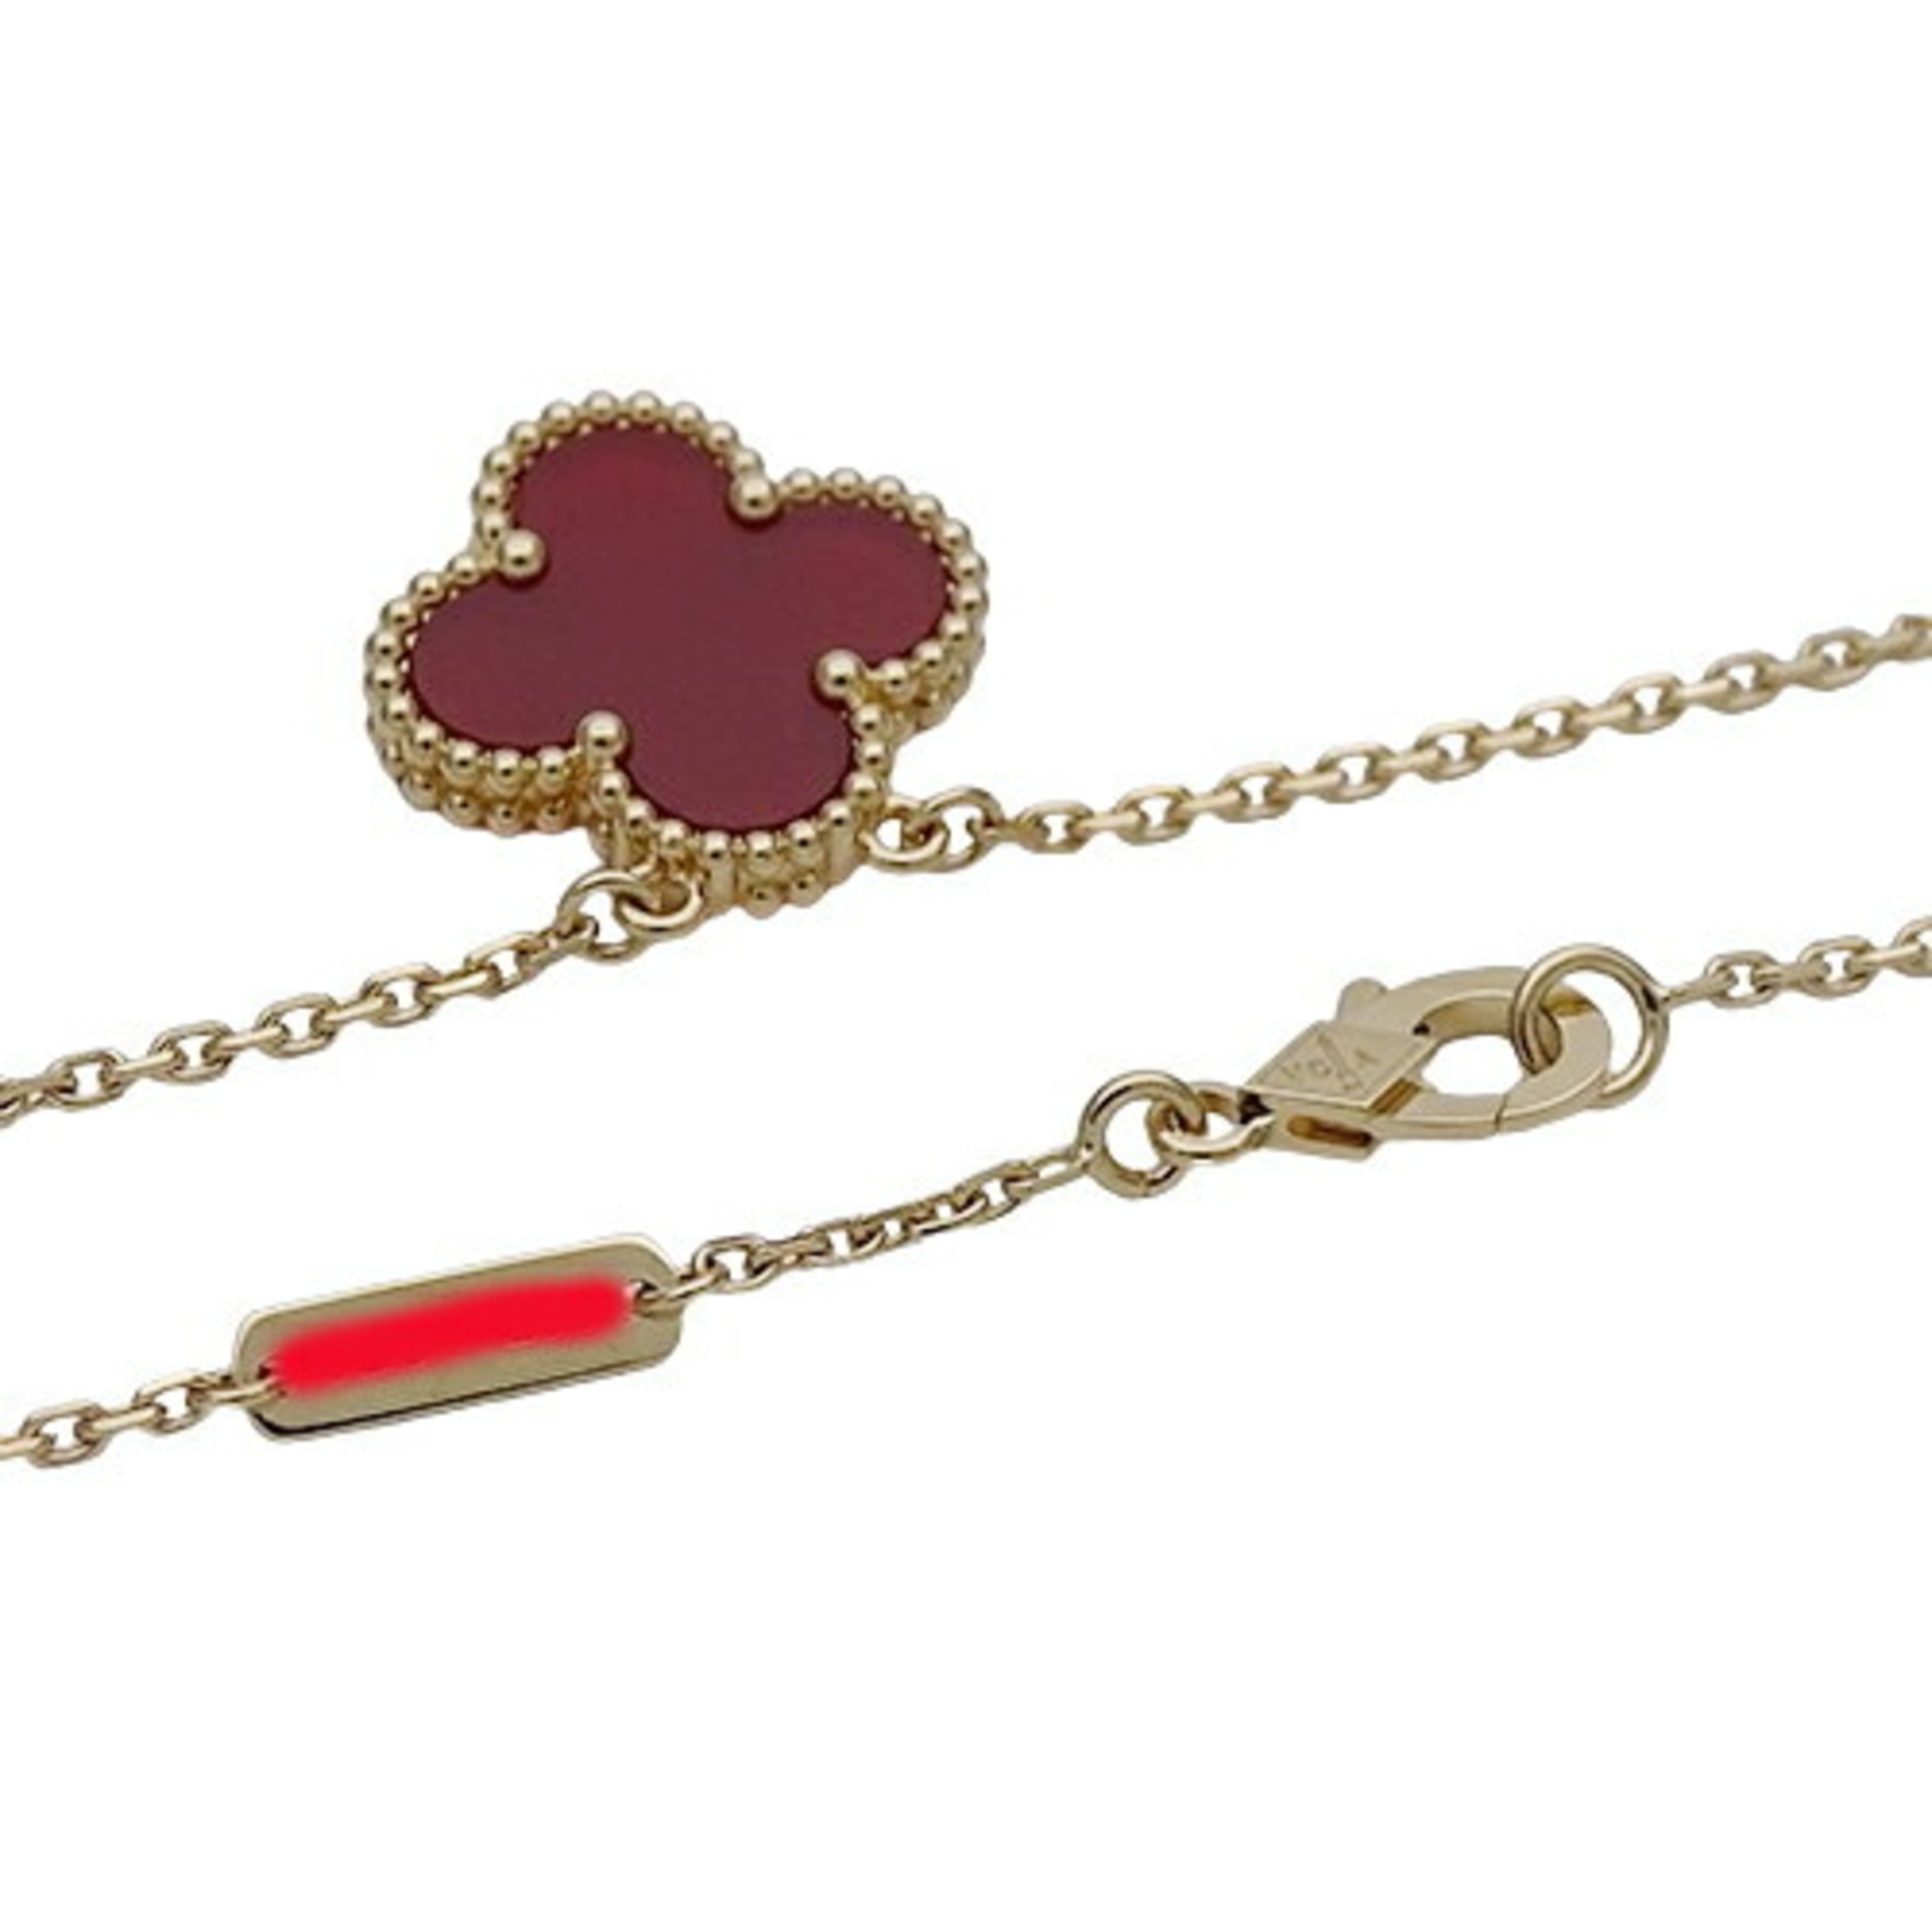 Van Cleef & Arpels Alhambra Necklace for Women, 750YG, Carnelian, Yellow Gold, Polished